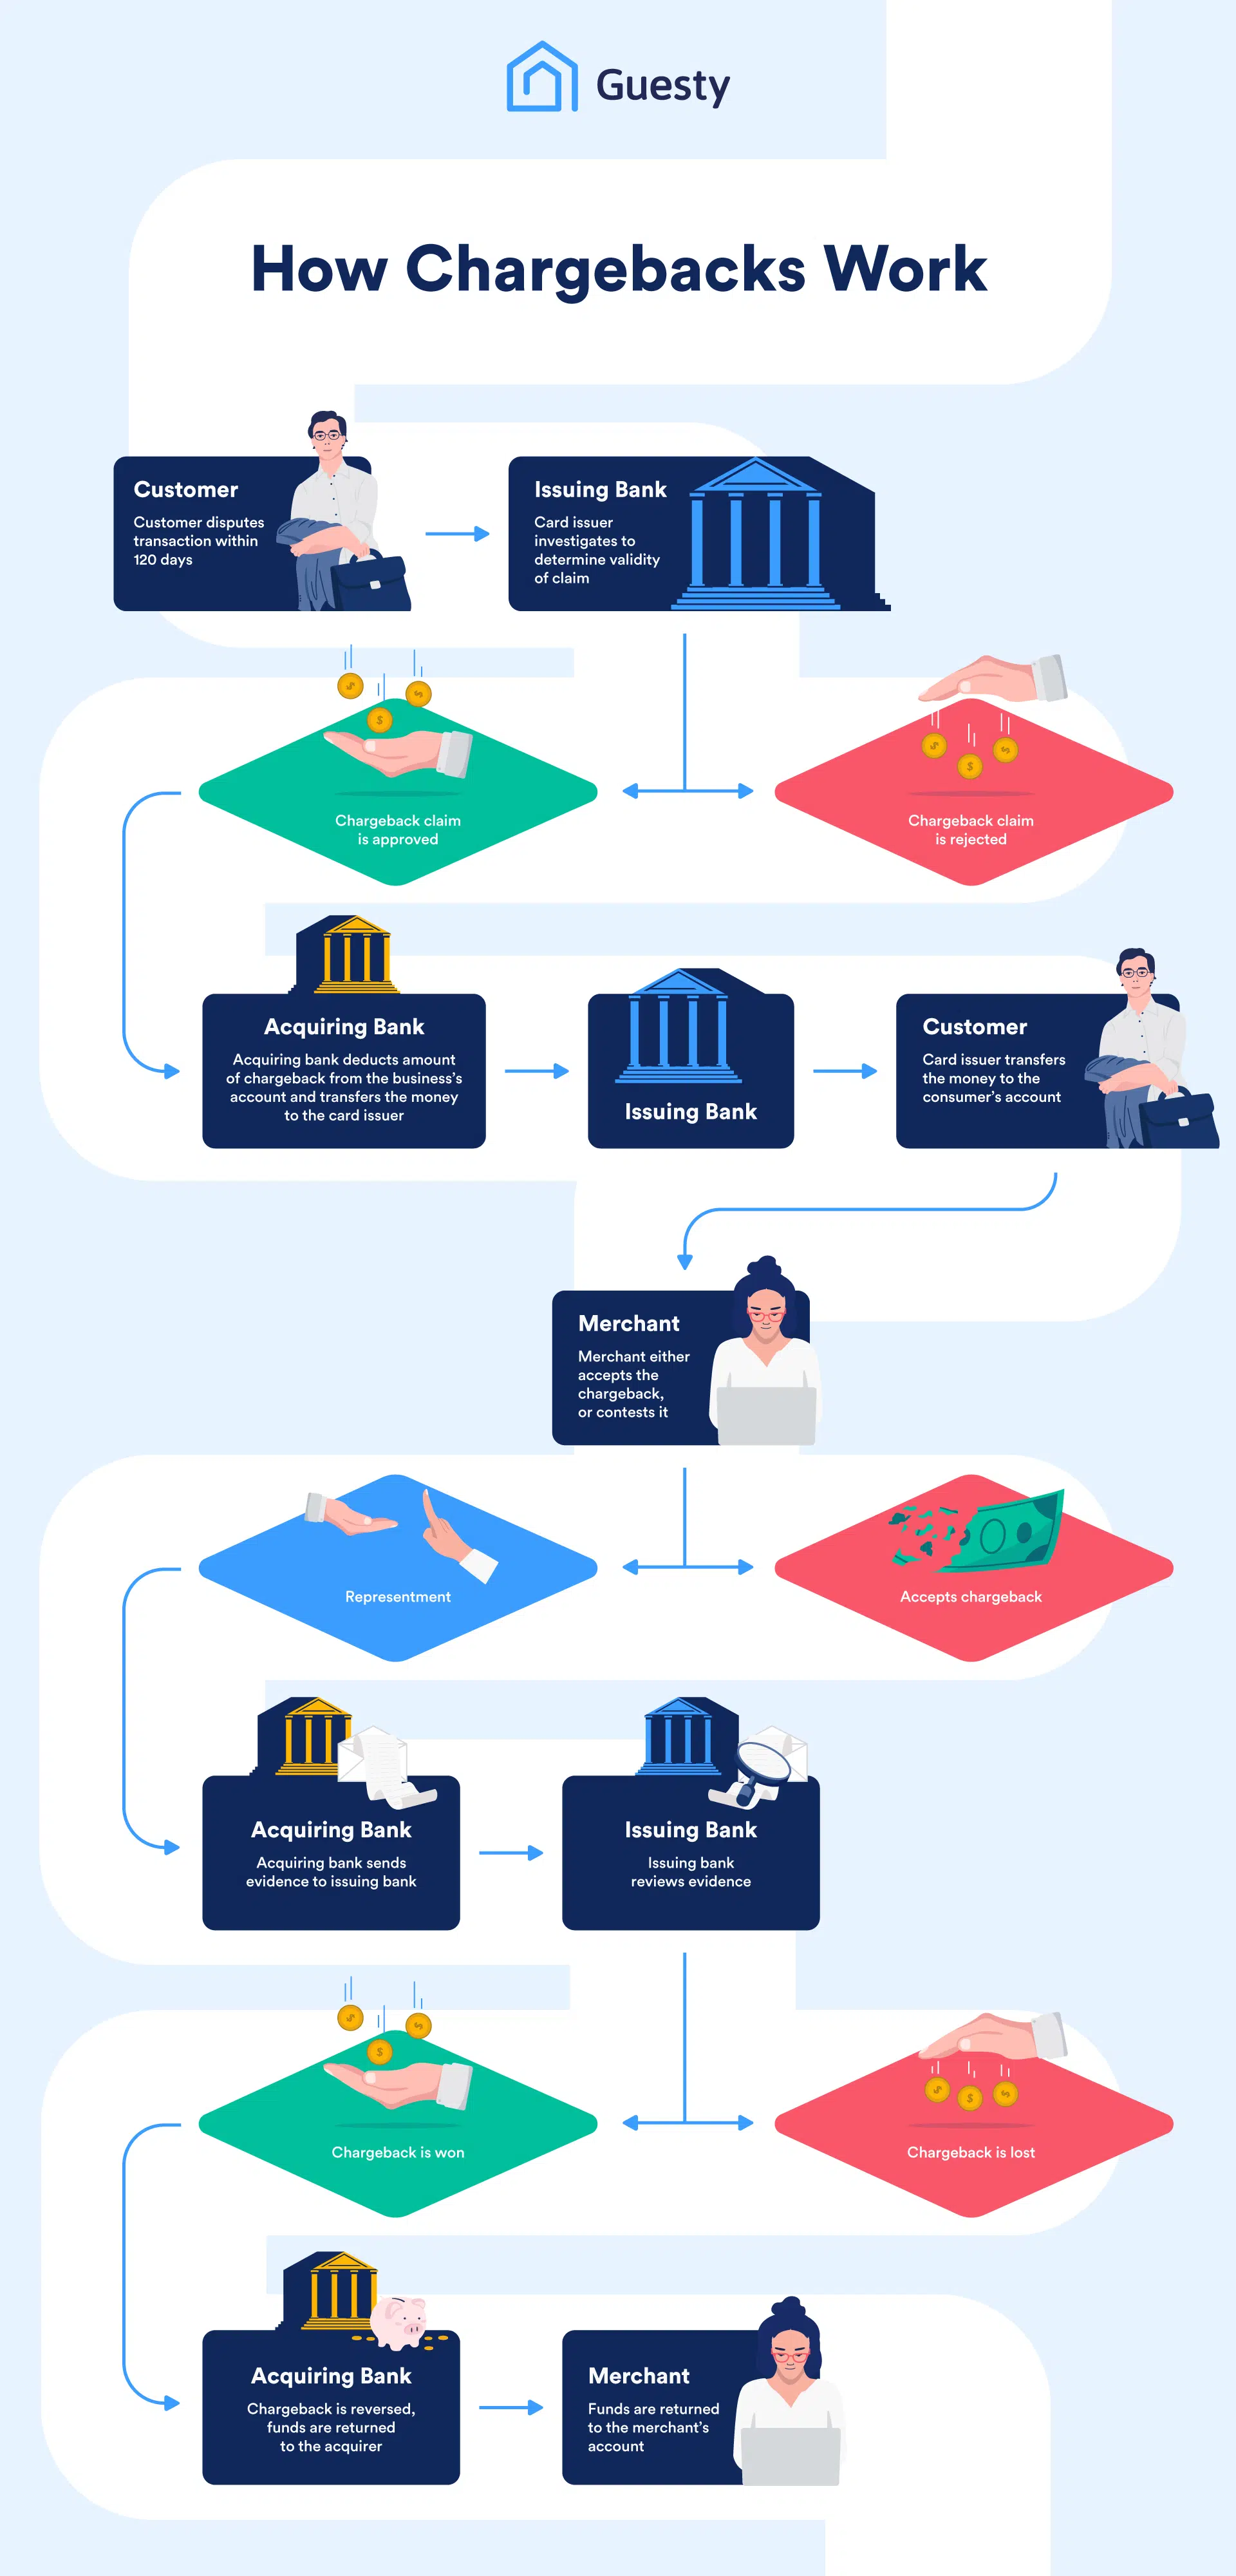 How the chargeback process works